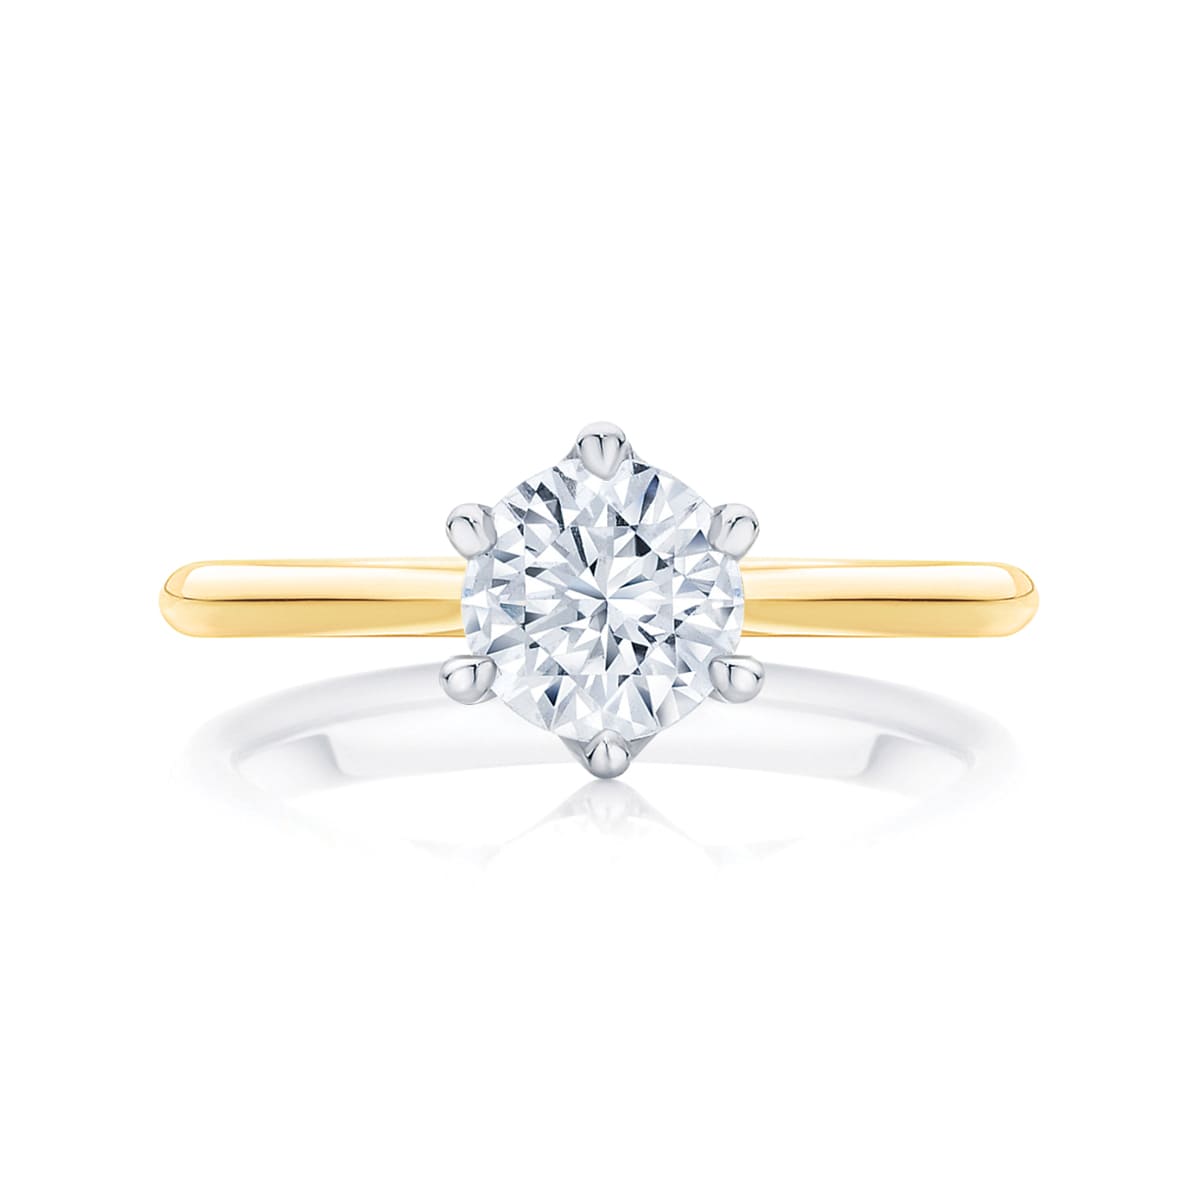 Yellow gold diamond solitaire 6 claw